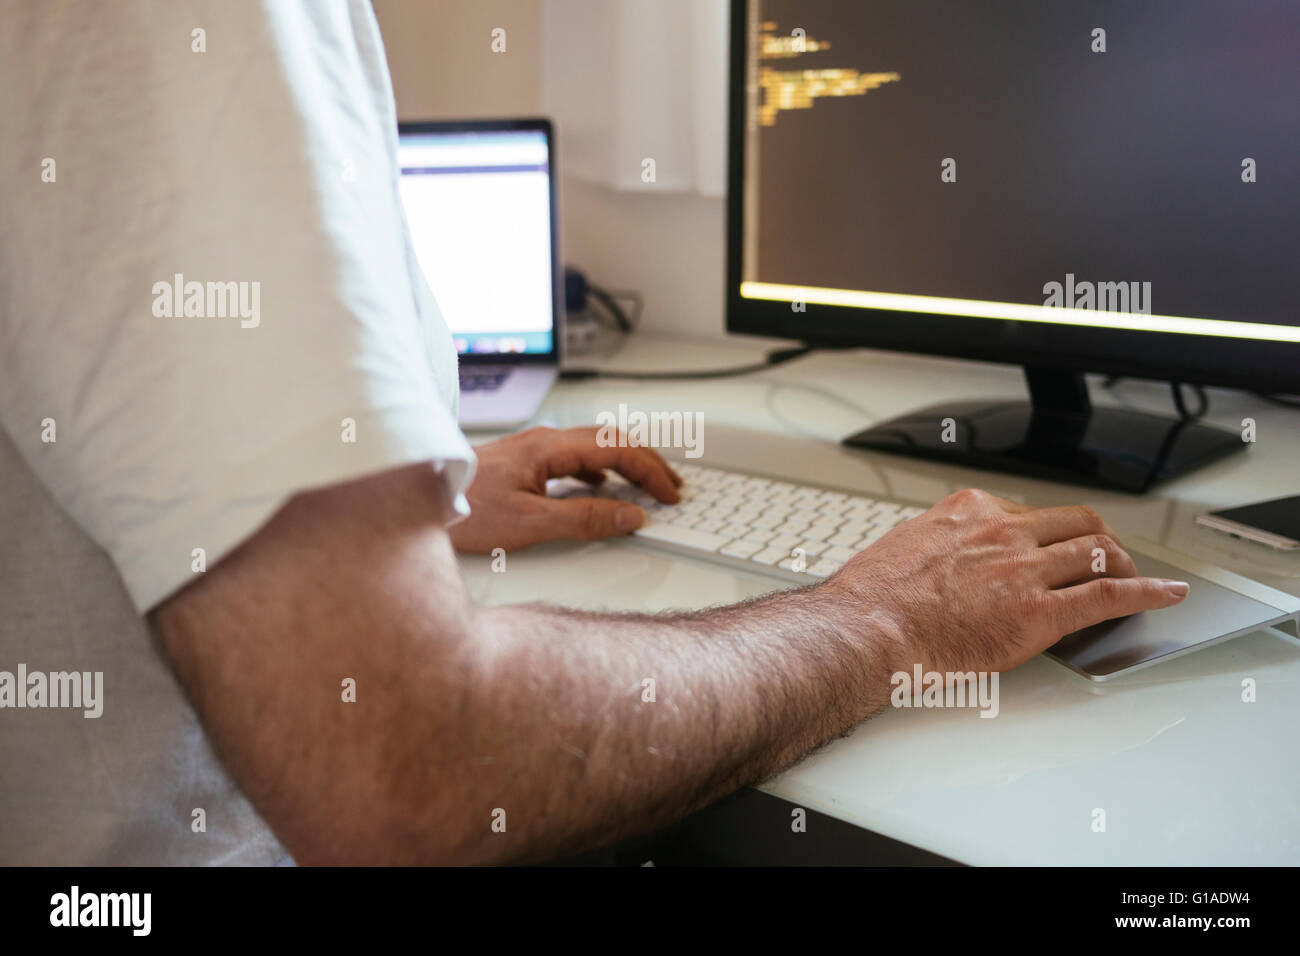 Web-developer writing code in home office. Stock Photo